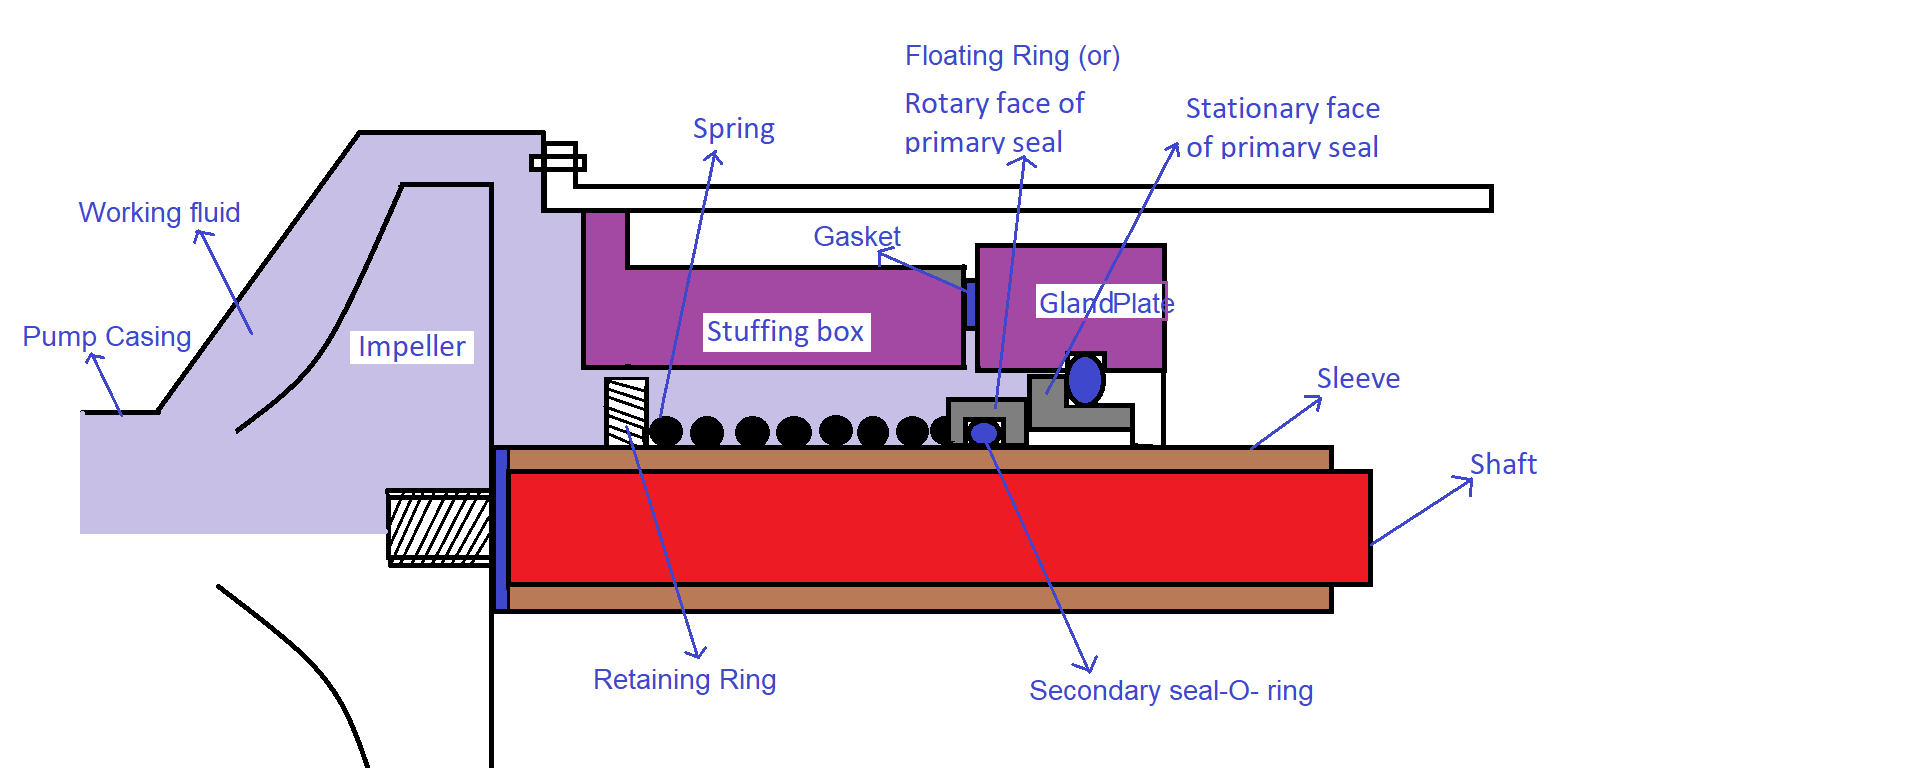 A Typical Mechanical Seal